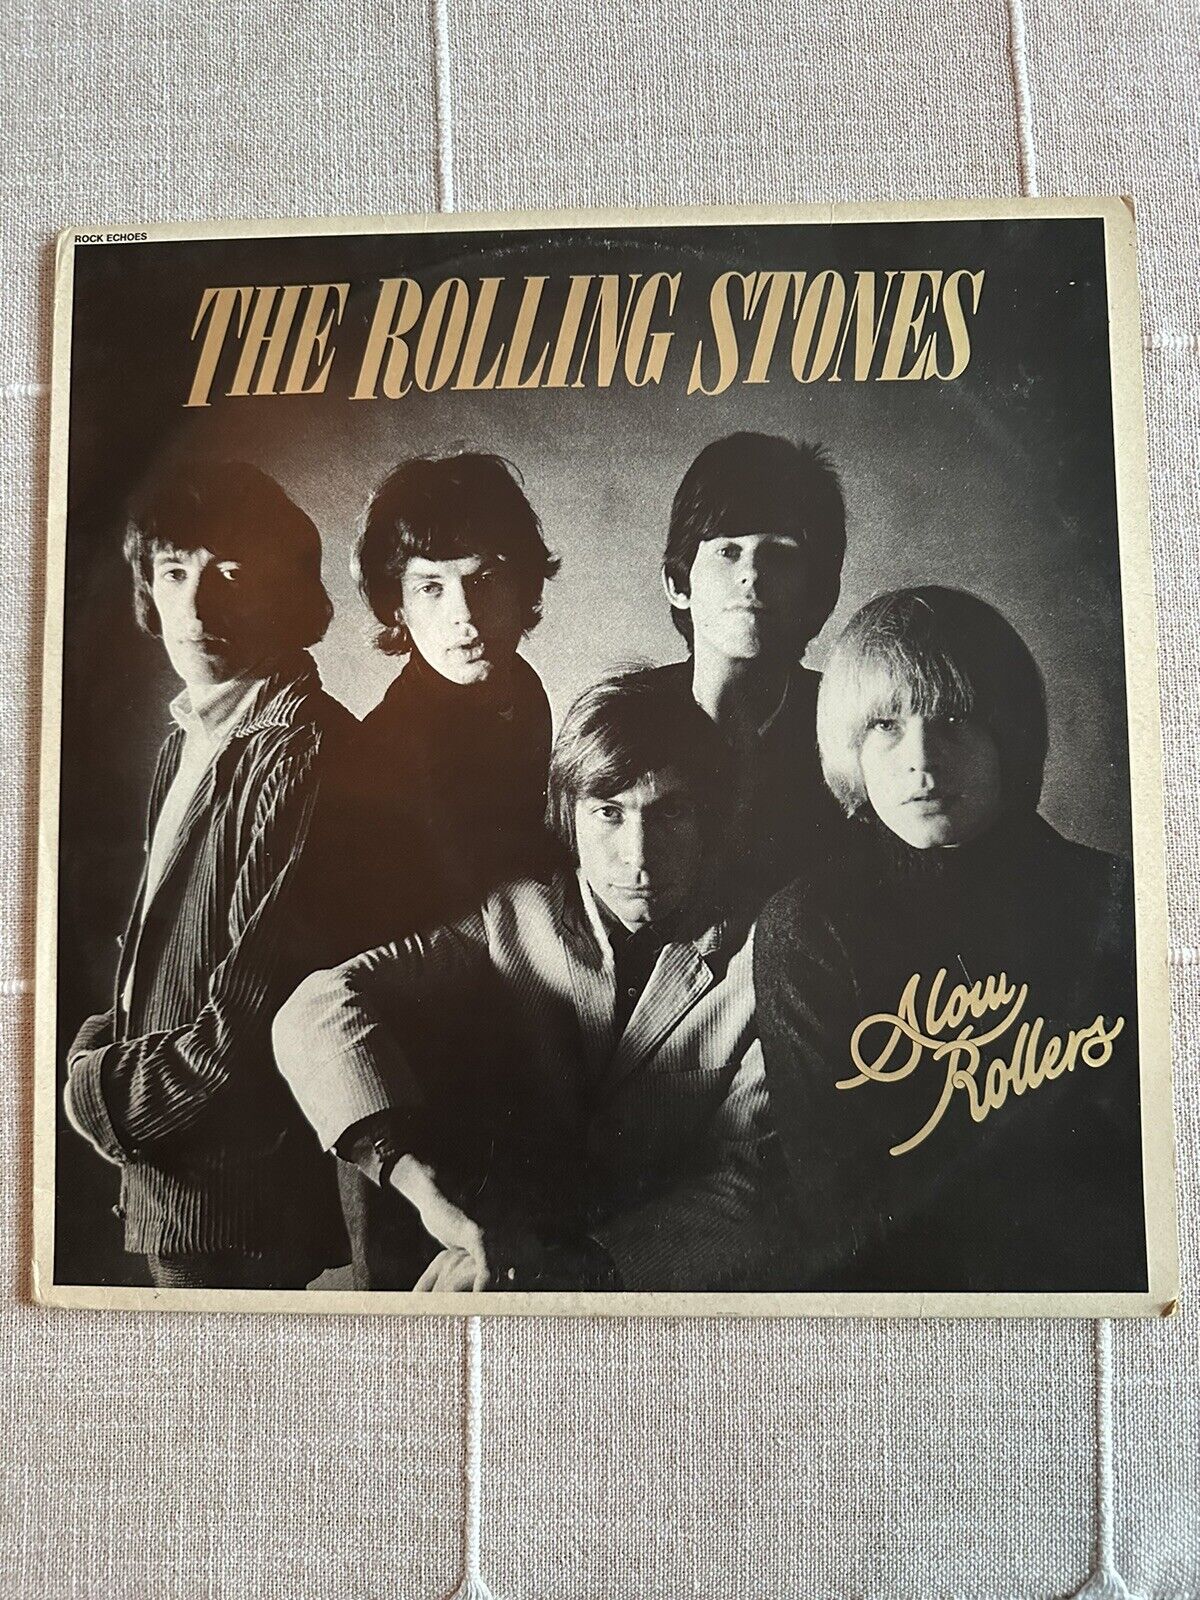 The Rolling Stones ‎– Slow Rollers - Decca ‎– TAB 30 - UK 1981  VG/EX+